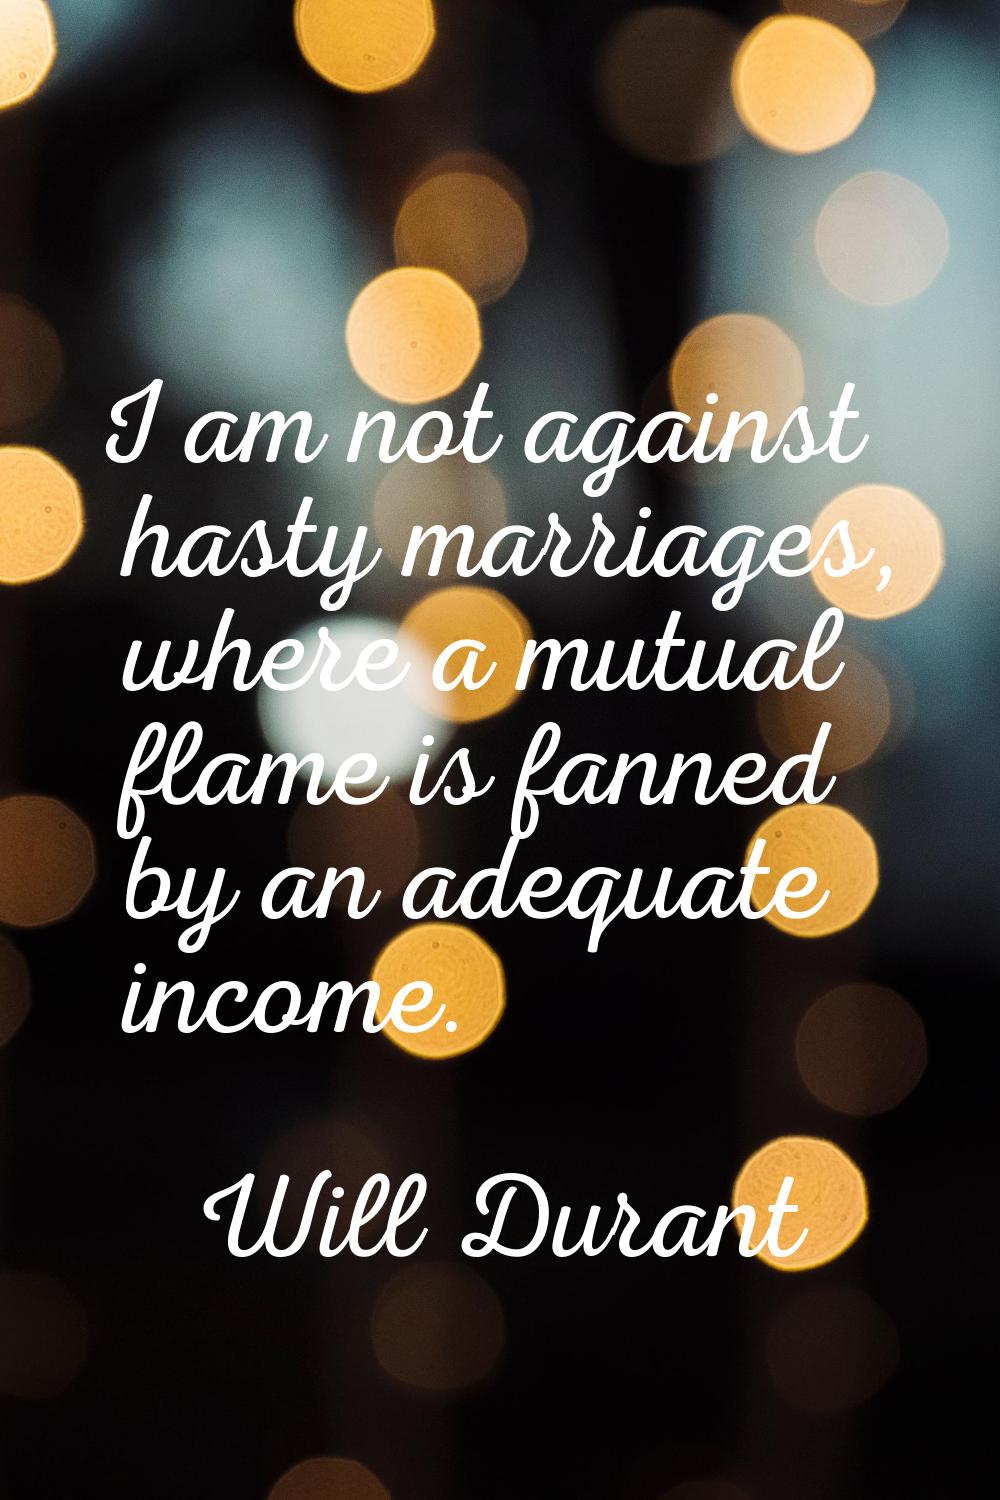 I am not against hasty marriages, where a mutual flame is fanned by an adequate income.